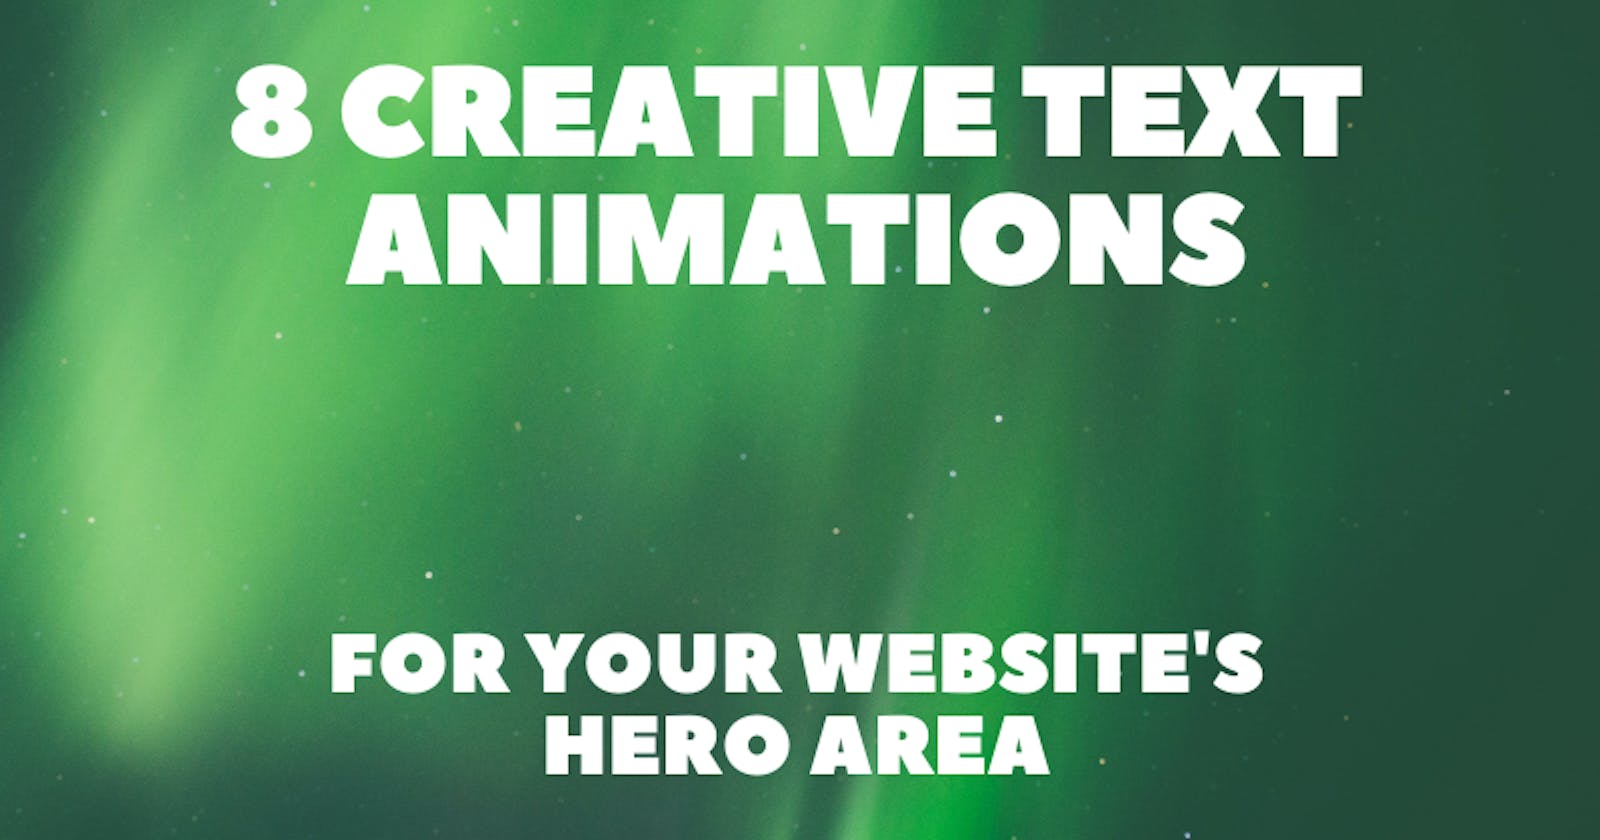 8 Creative Text Animations for Your Website's Hero Area 😍🎉